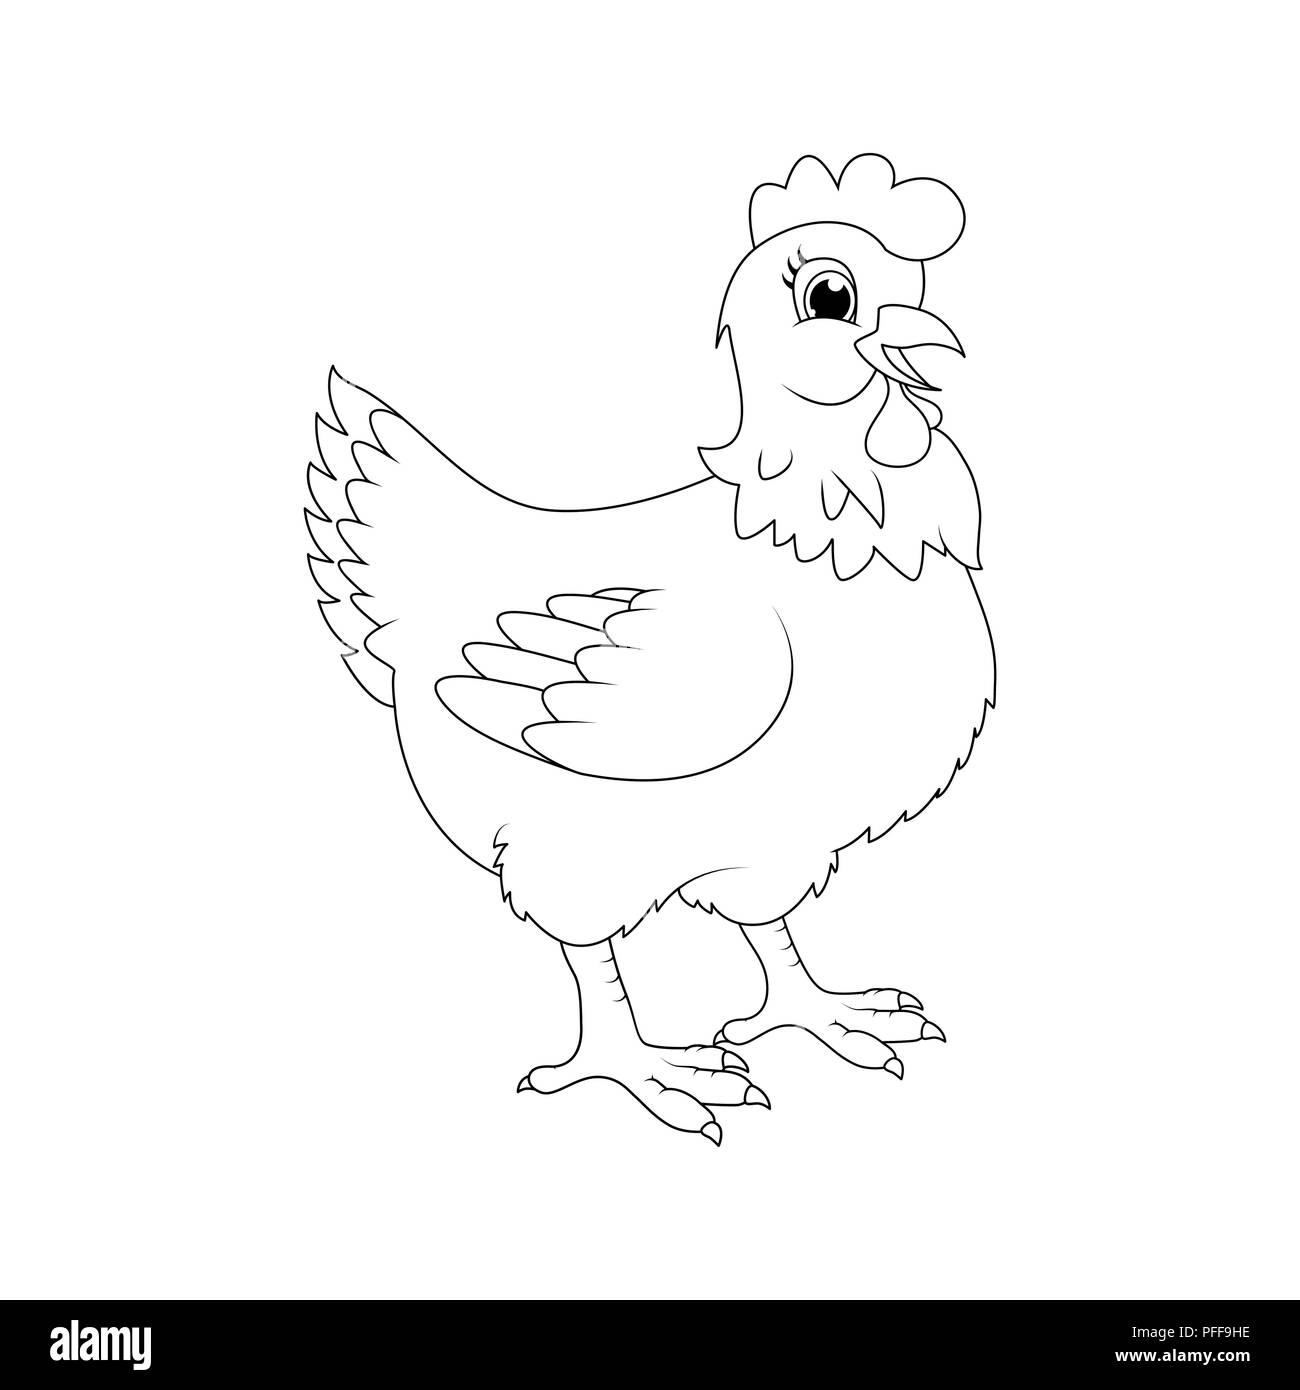 hen outline cartoon character vector design isolated on white background Stock Vector